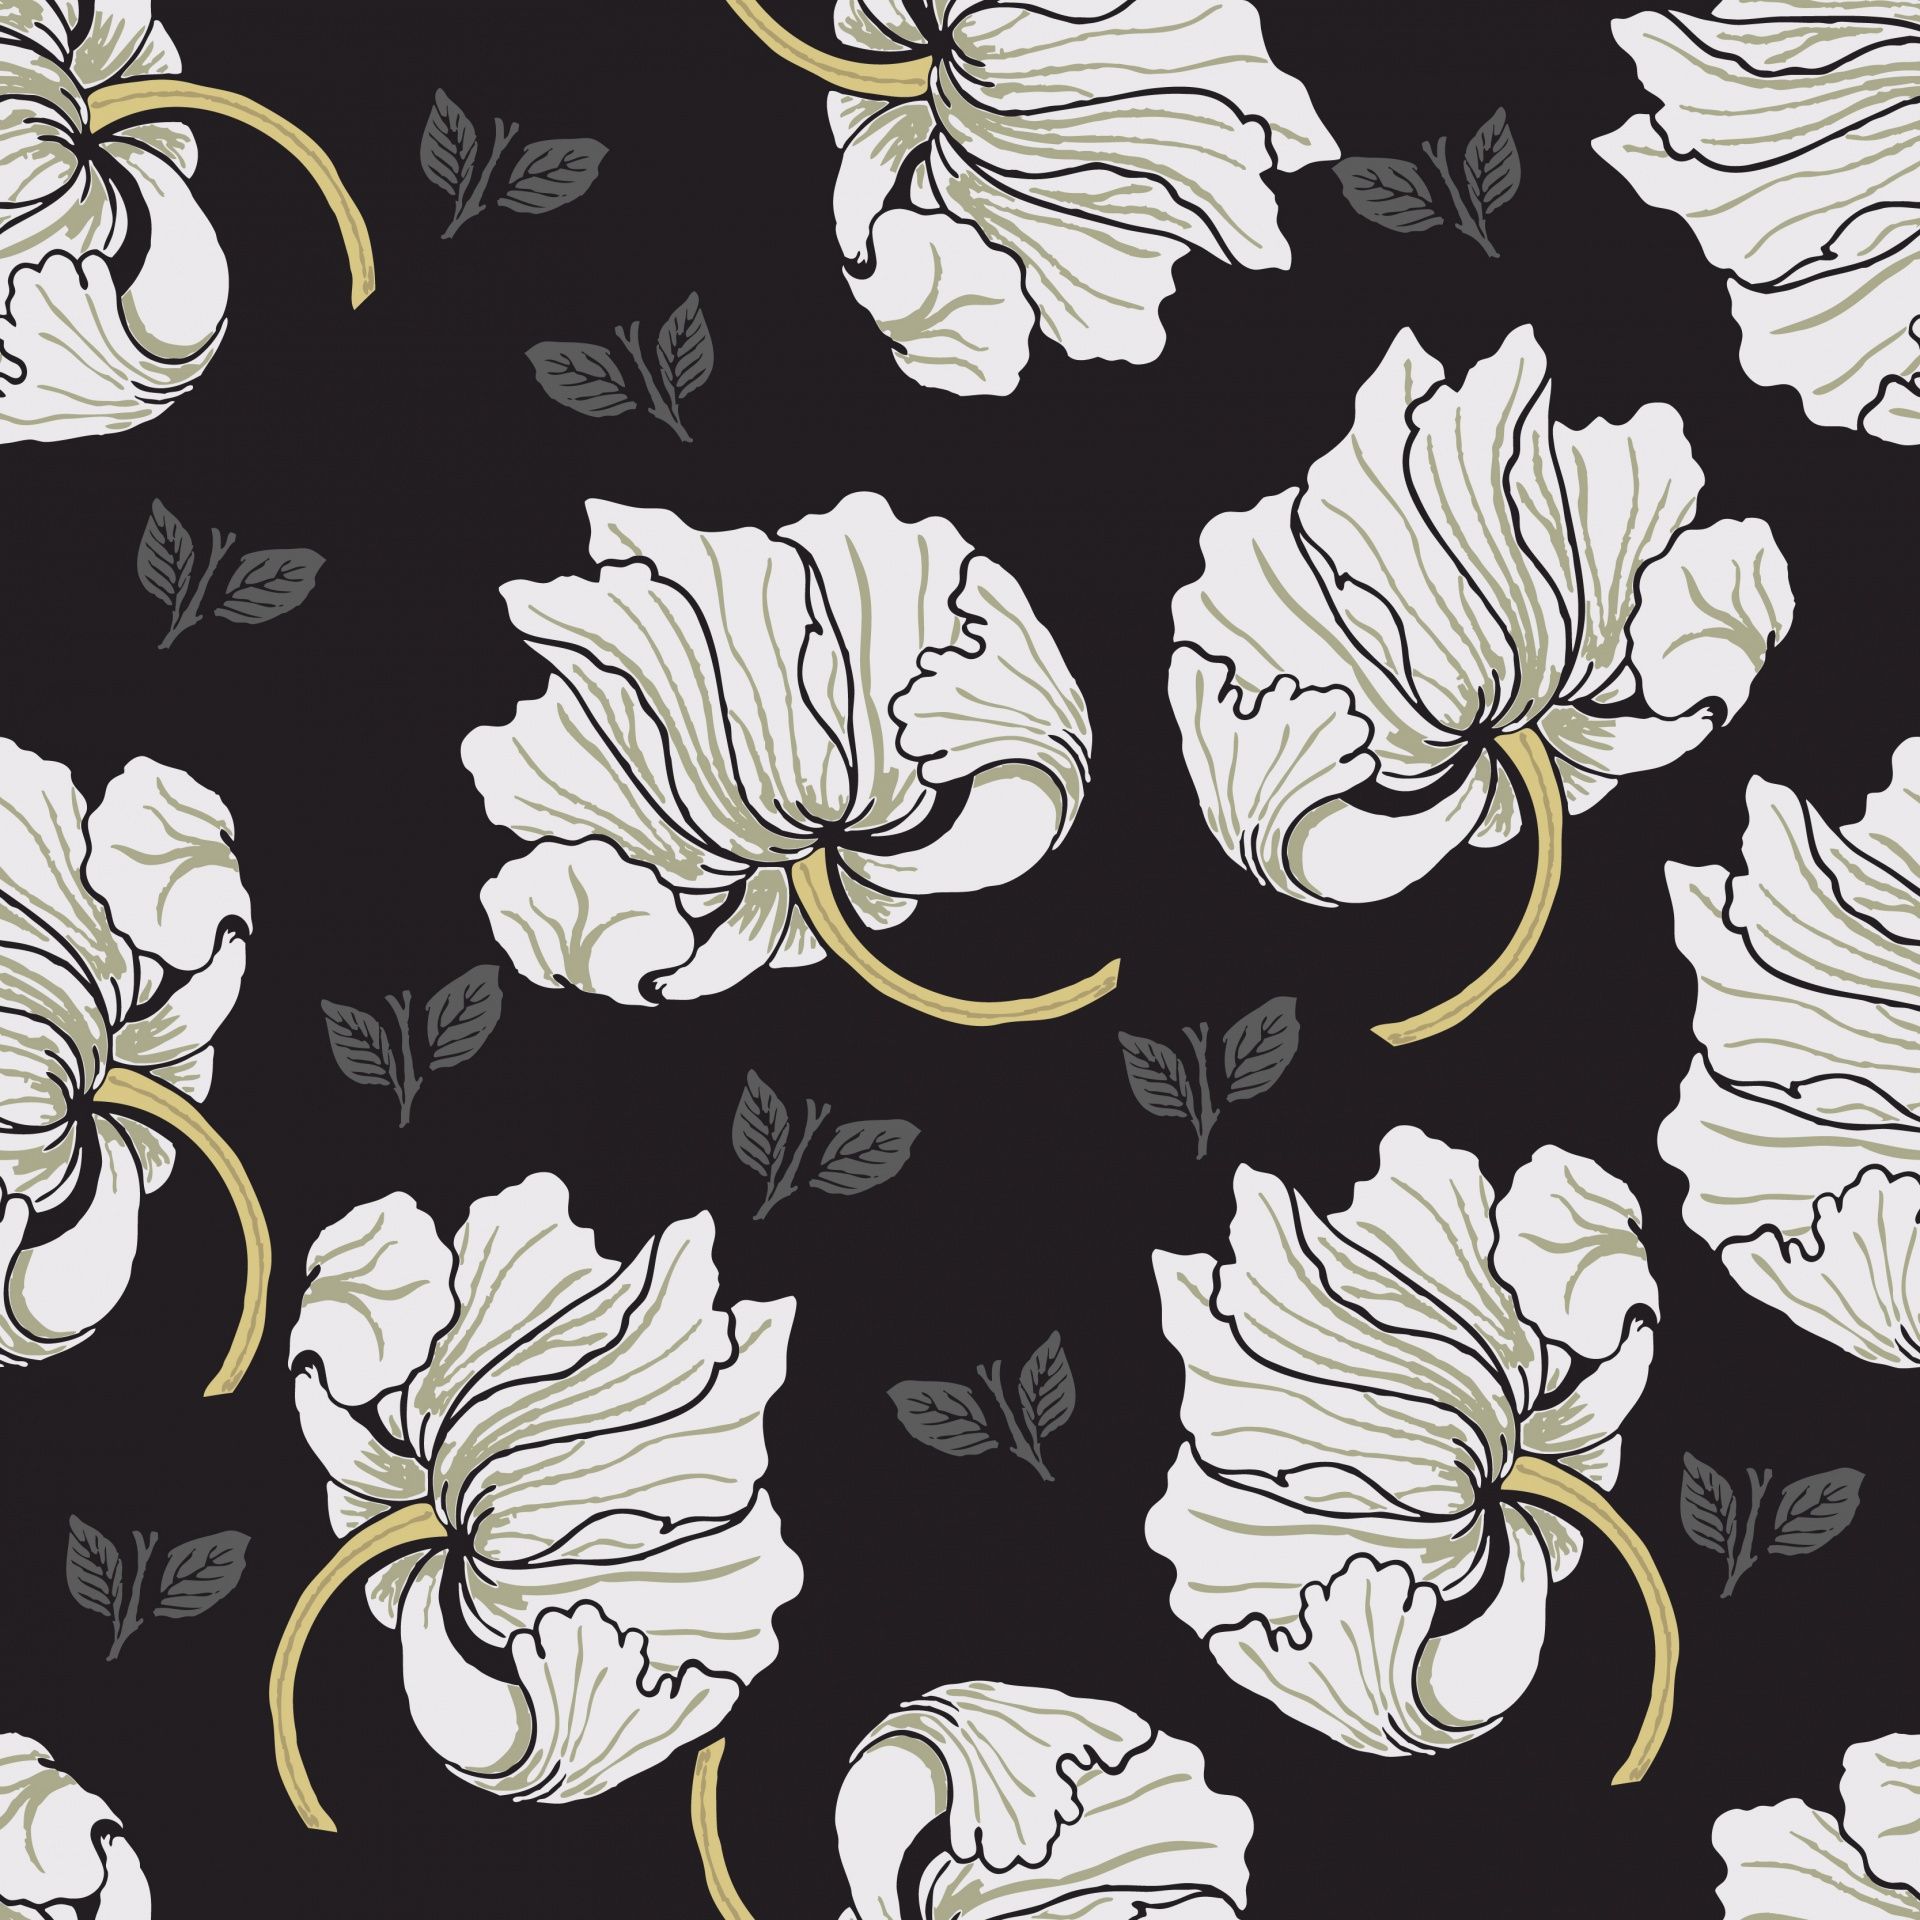 Black and White Floral Desktop Wallpapers - 4k, HD Black and White